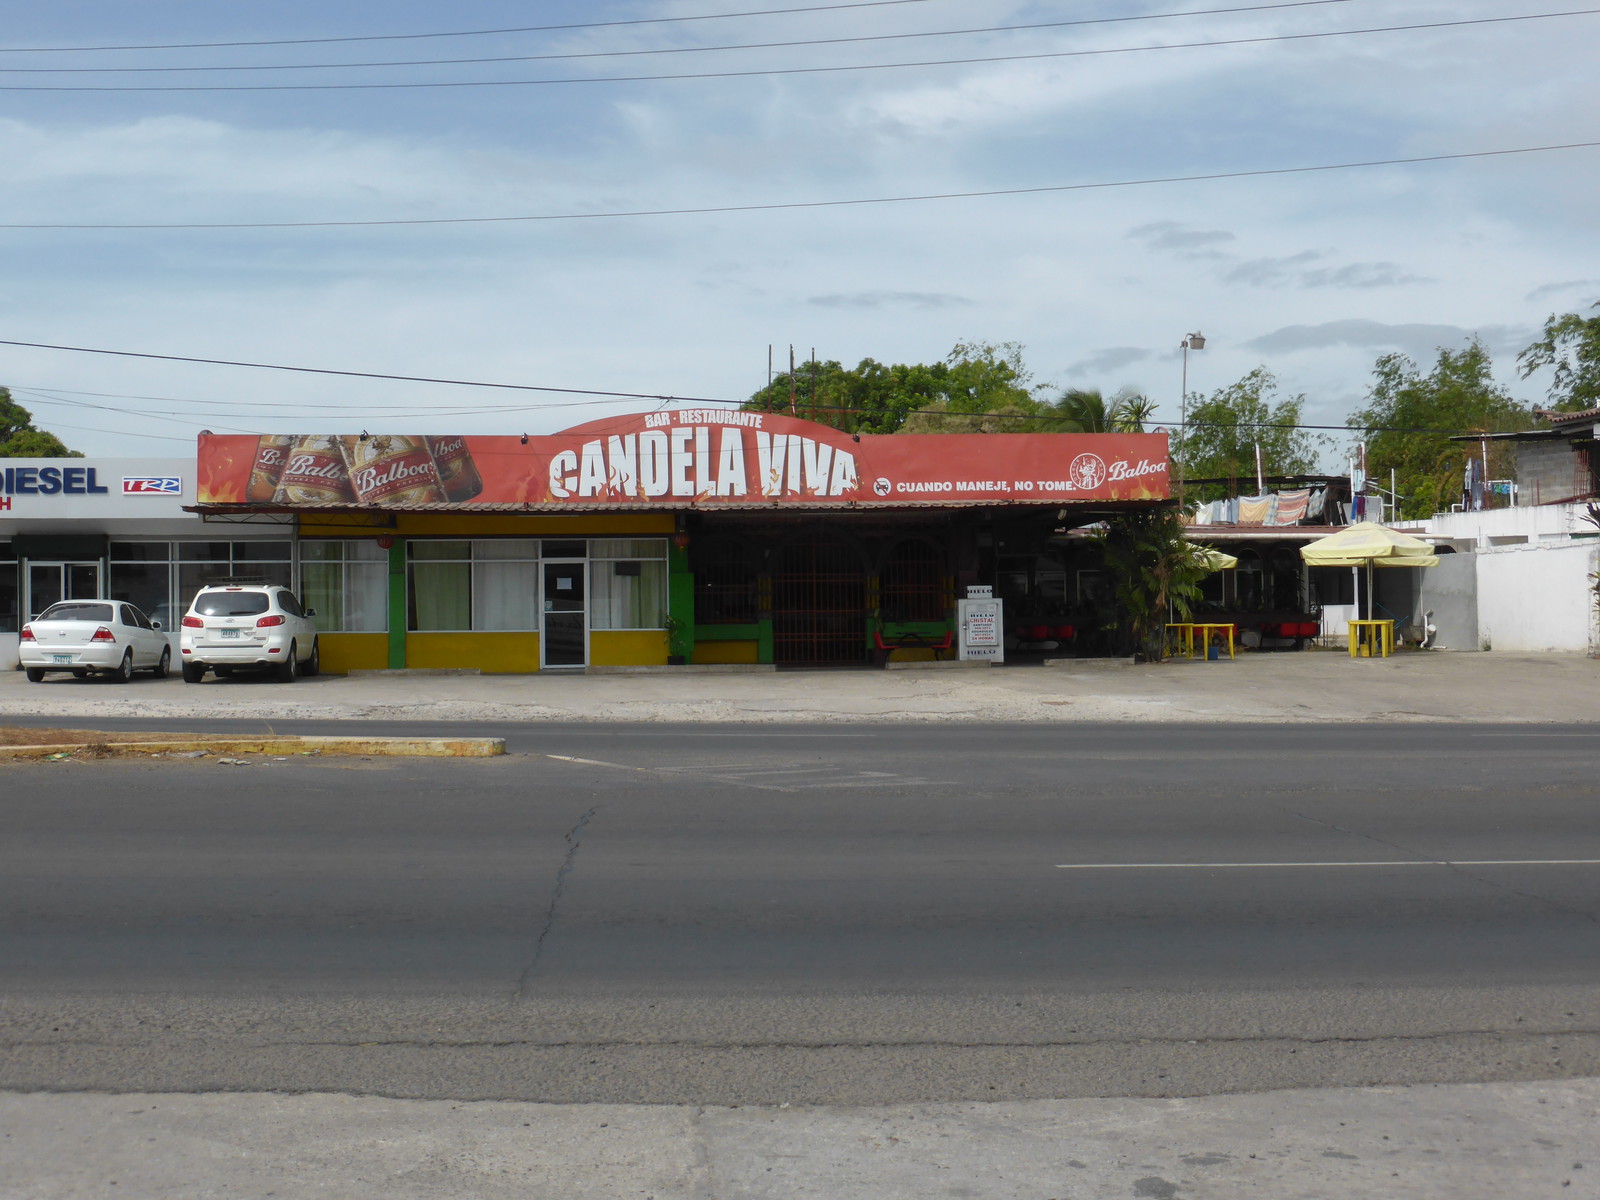 La Candela Viva - A Picture from Santiago, Panama - Travel Writing